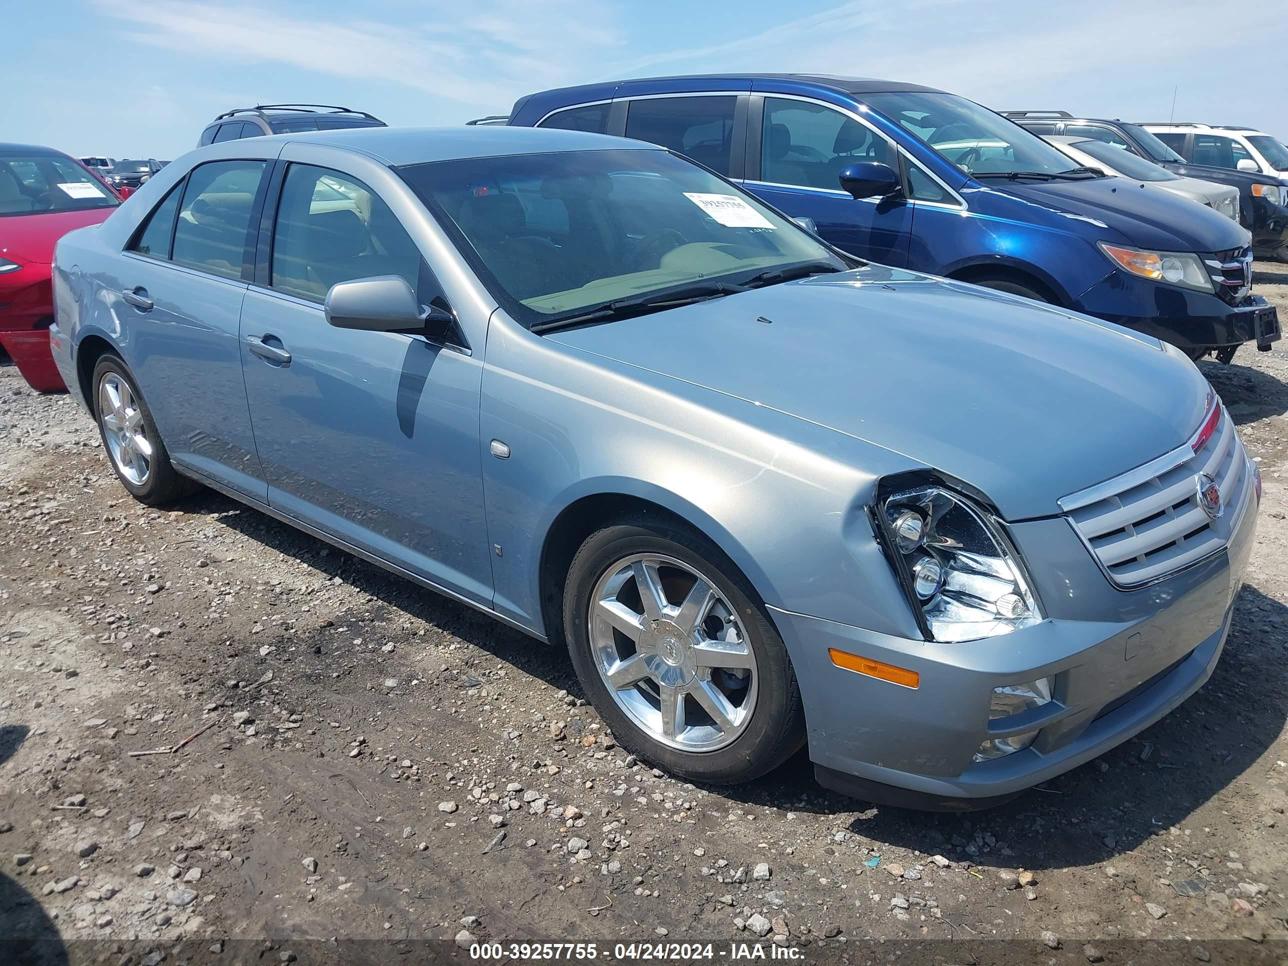 1G6DW677070191437  - CADILLAC STS  2007 IMG - 0